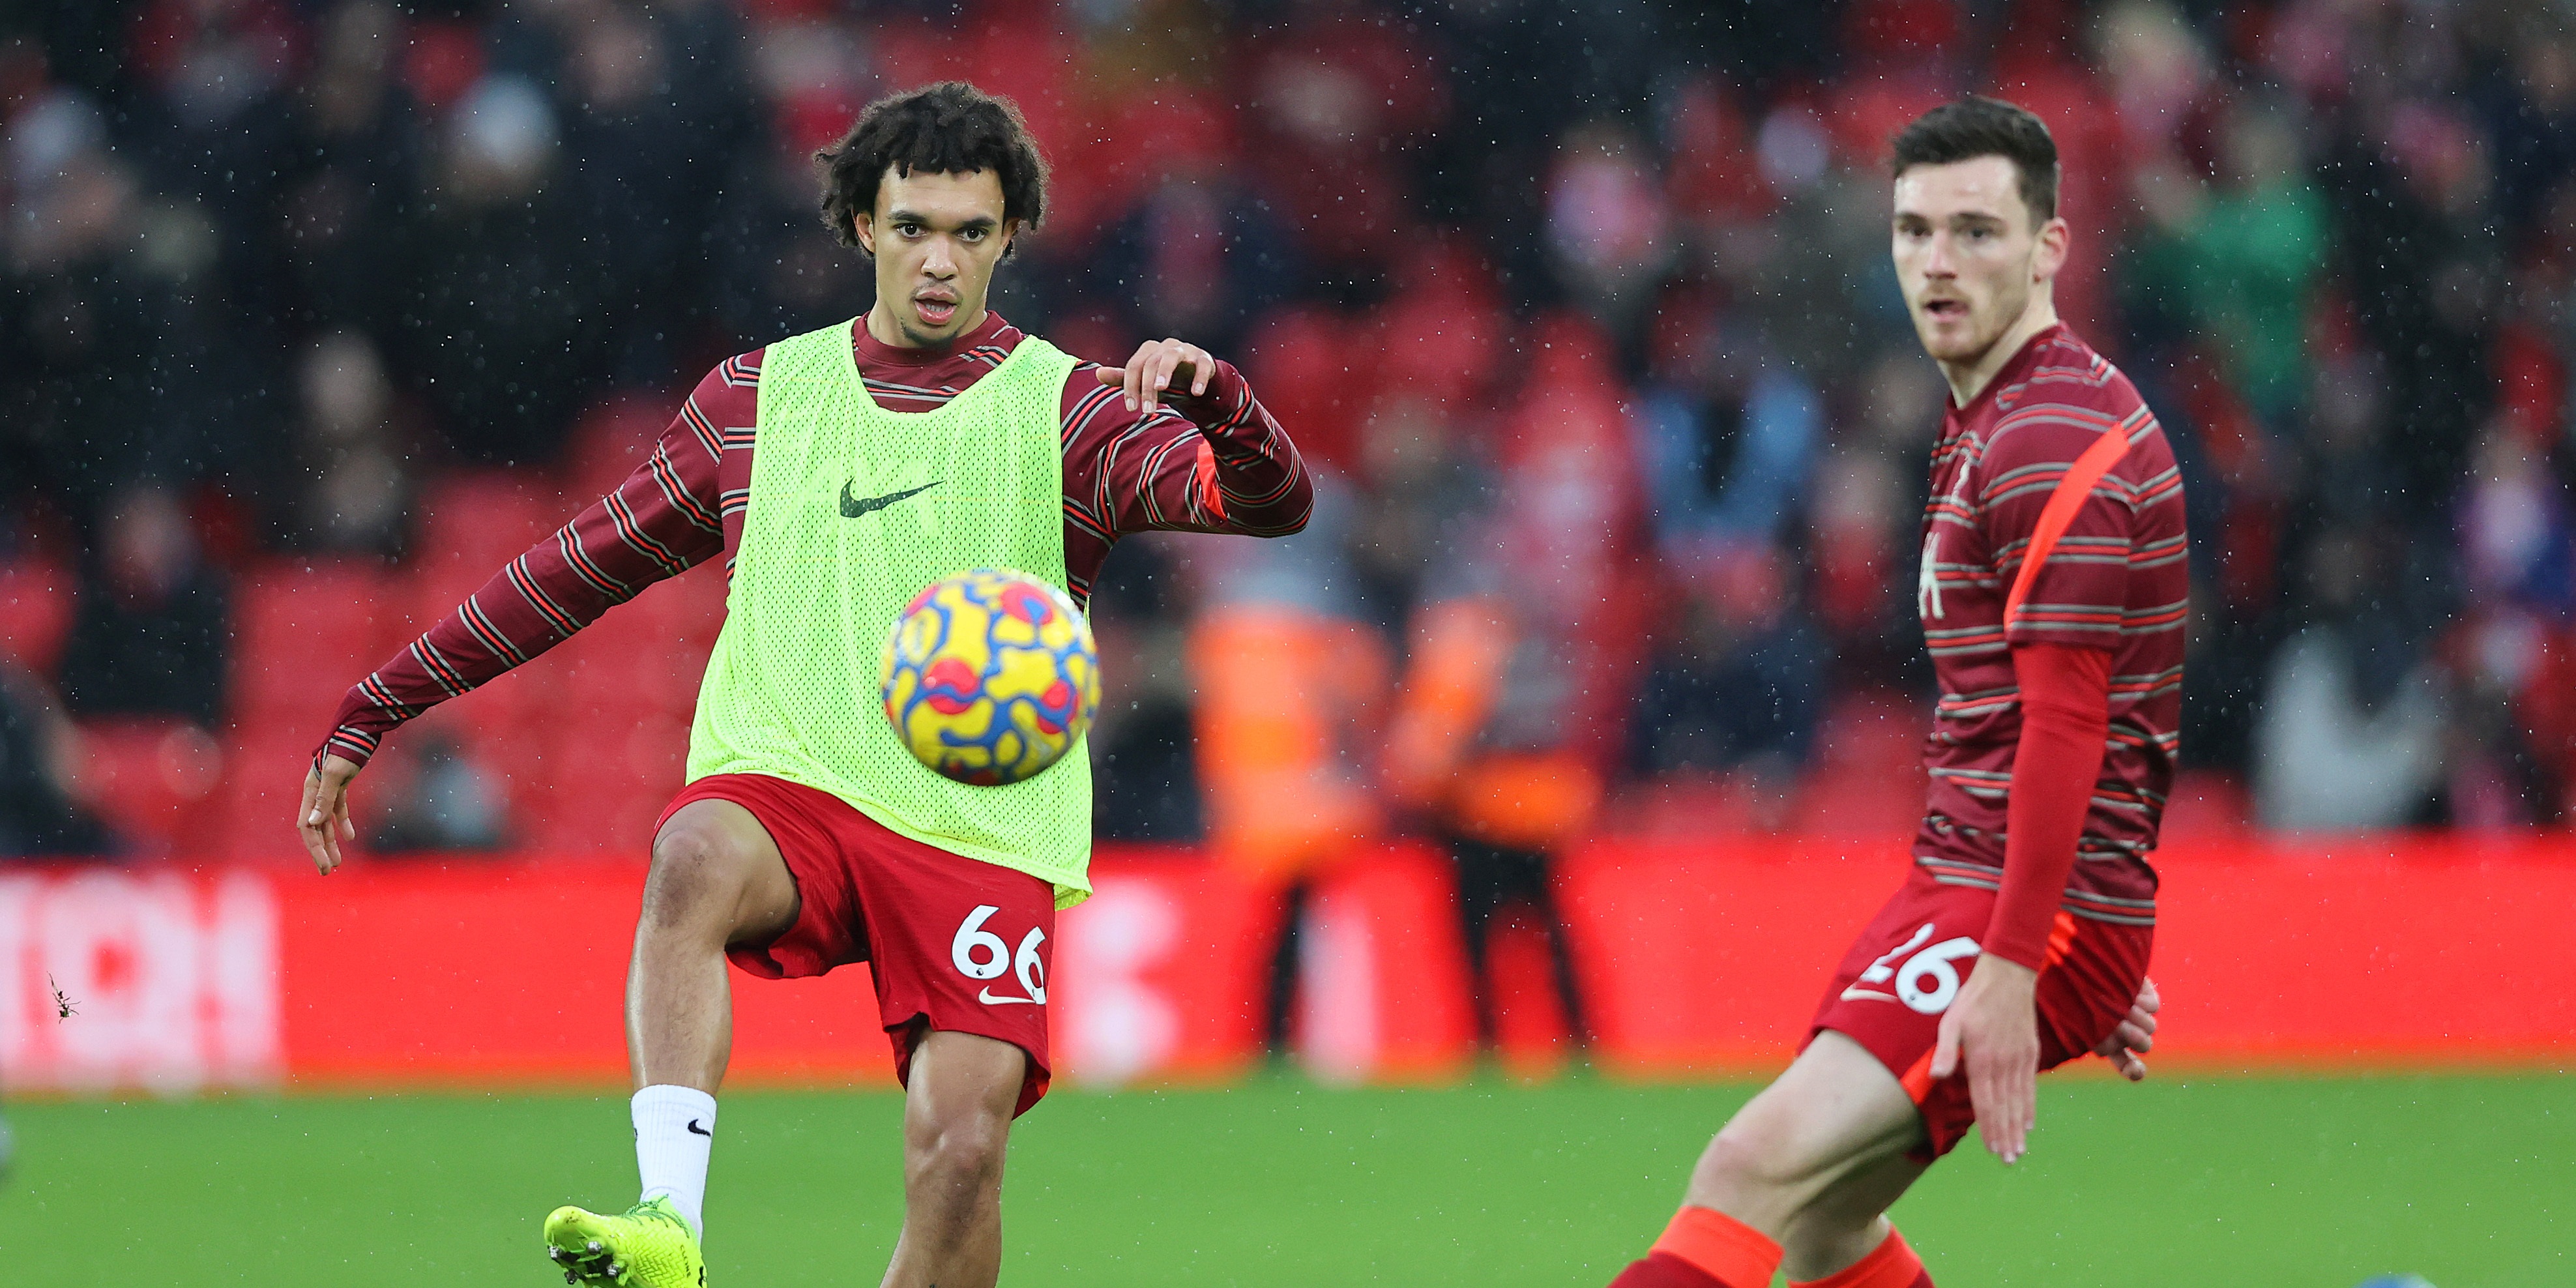 ‘Watch out’ – West Ham star warns Manchester City about Liverpool duo and compares Trent Alexander-Arnold to David Beckham